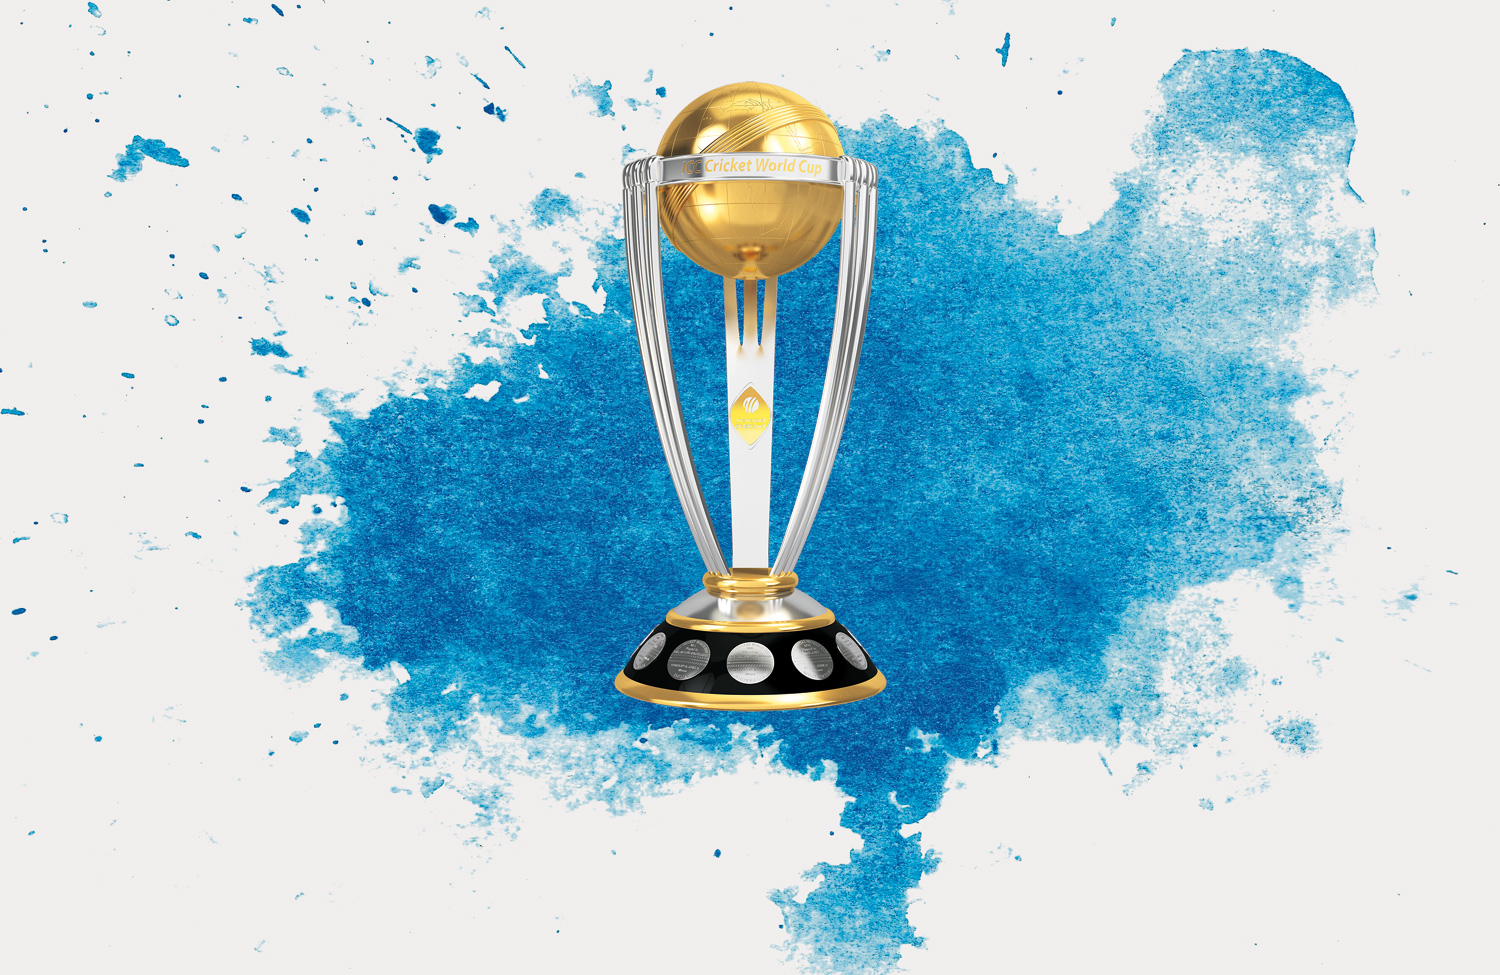 ICC Cricket World Cup Trophy arrives today - Oman Observer